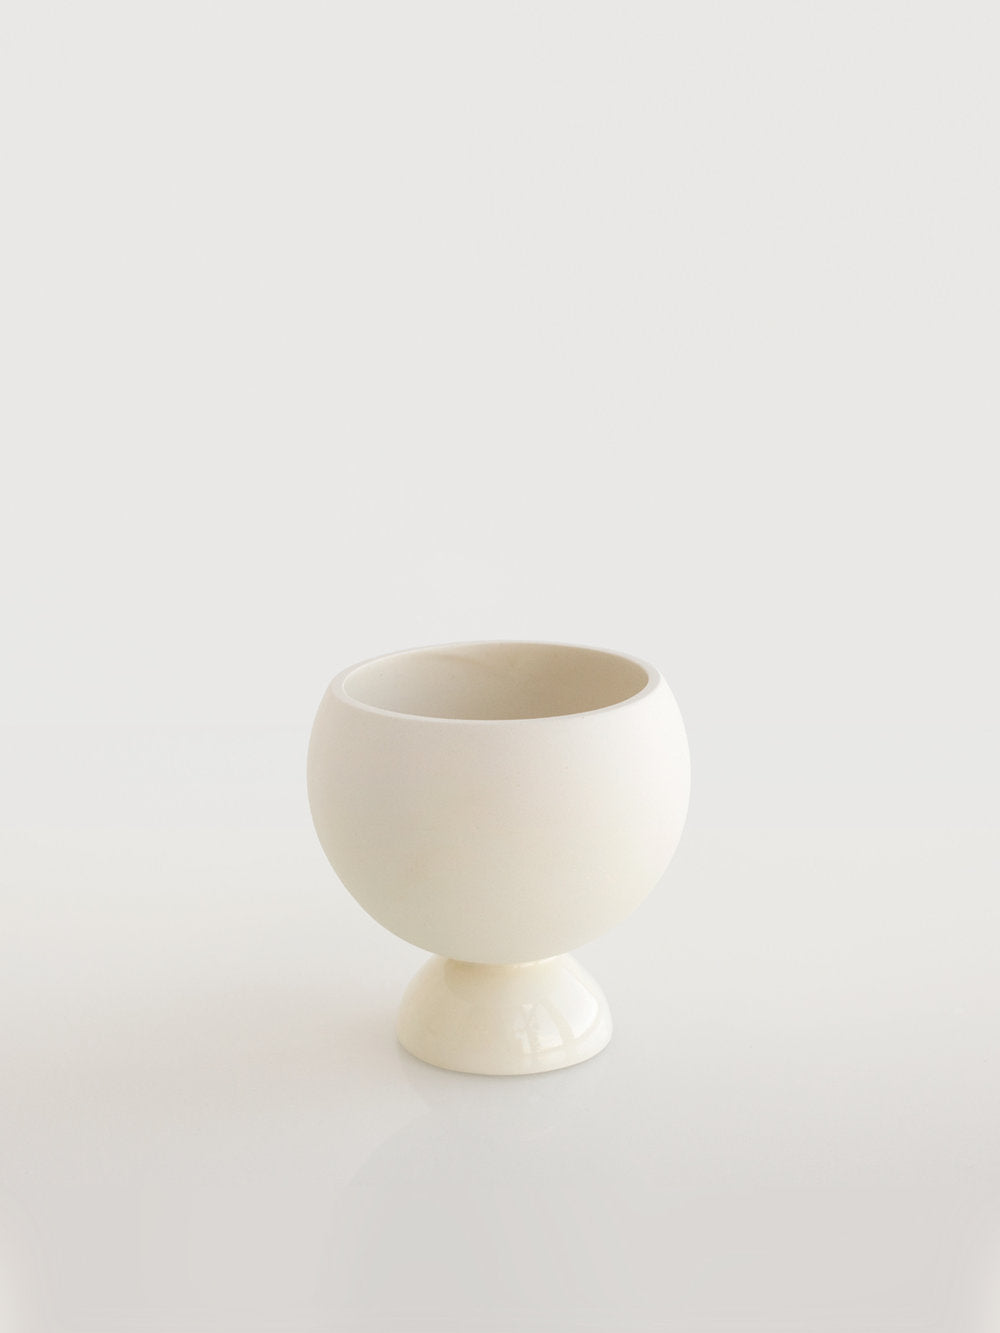 Empty cova vase in matte white porcelain with glazed interior and base